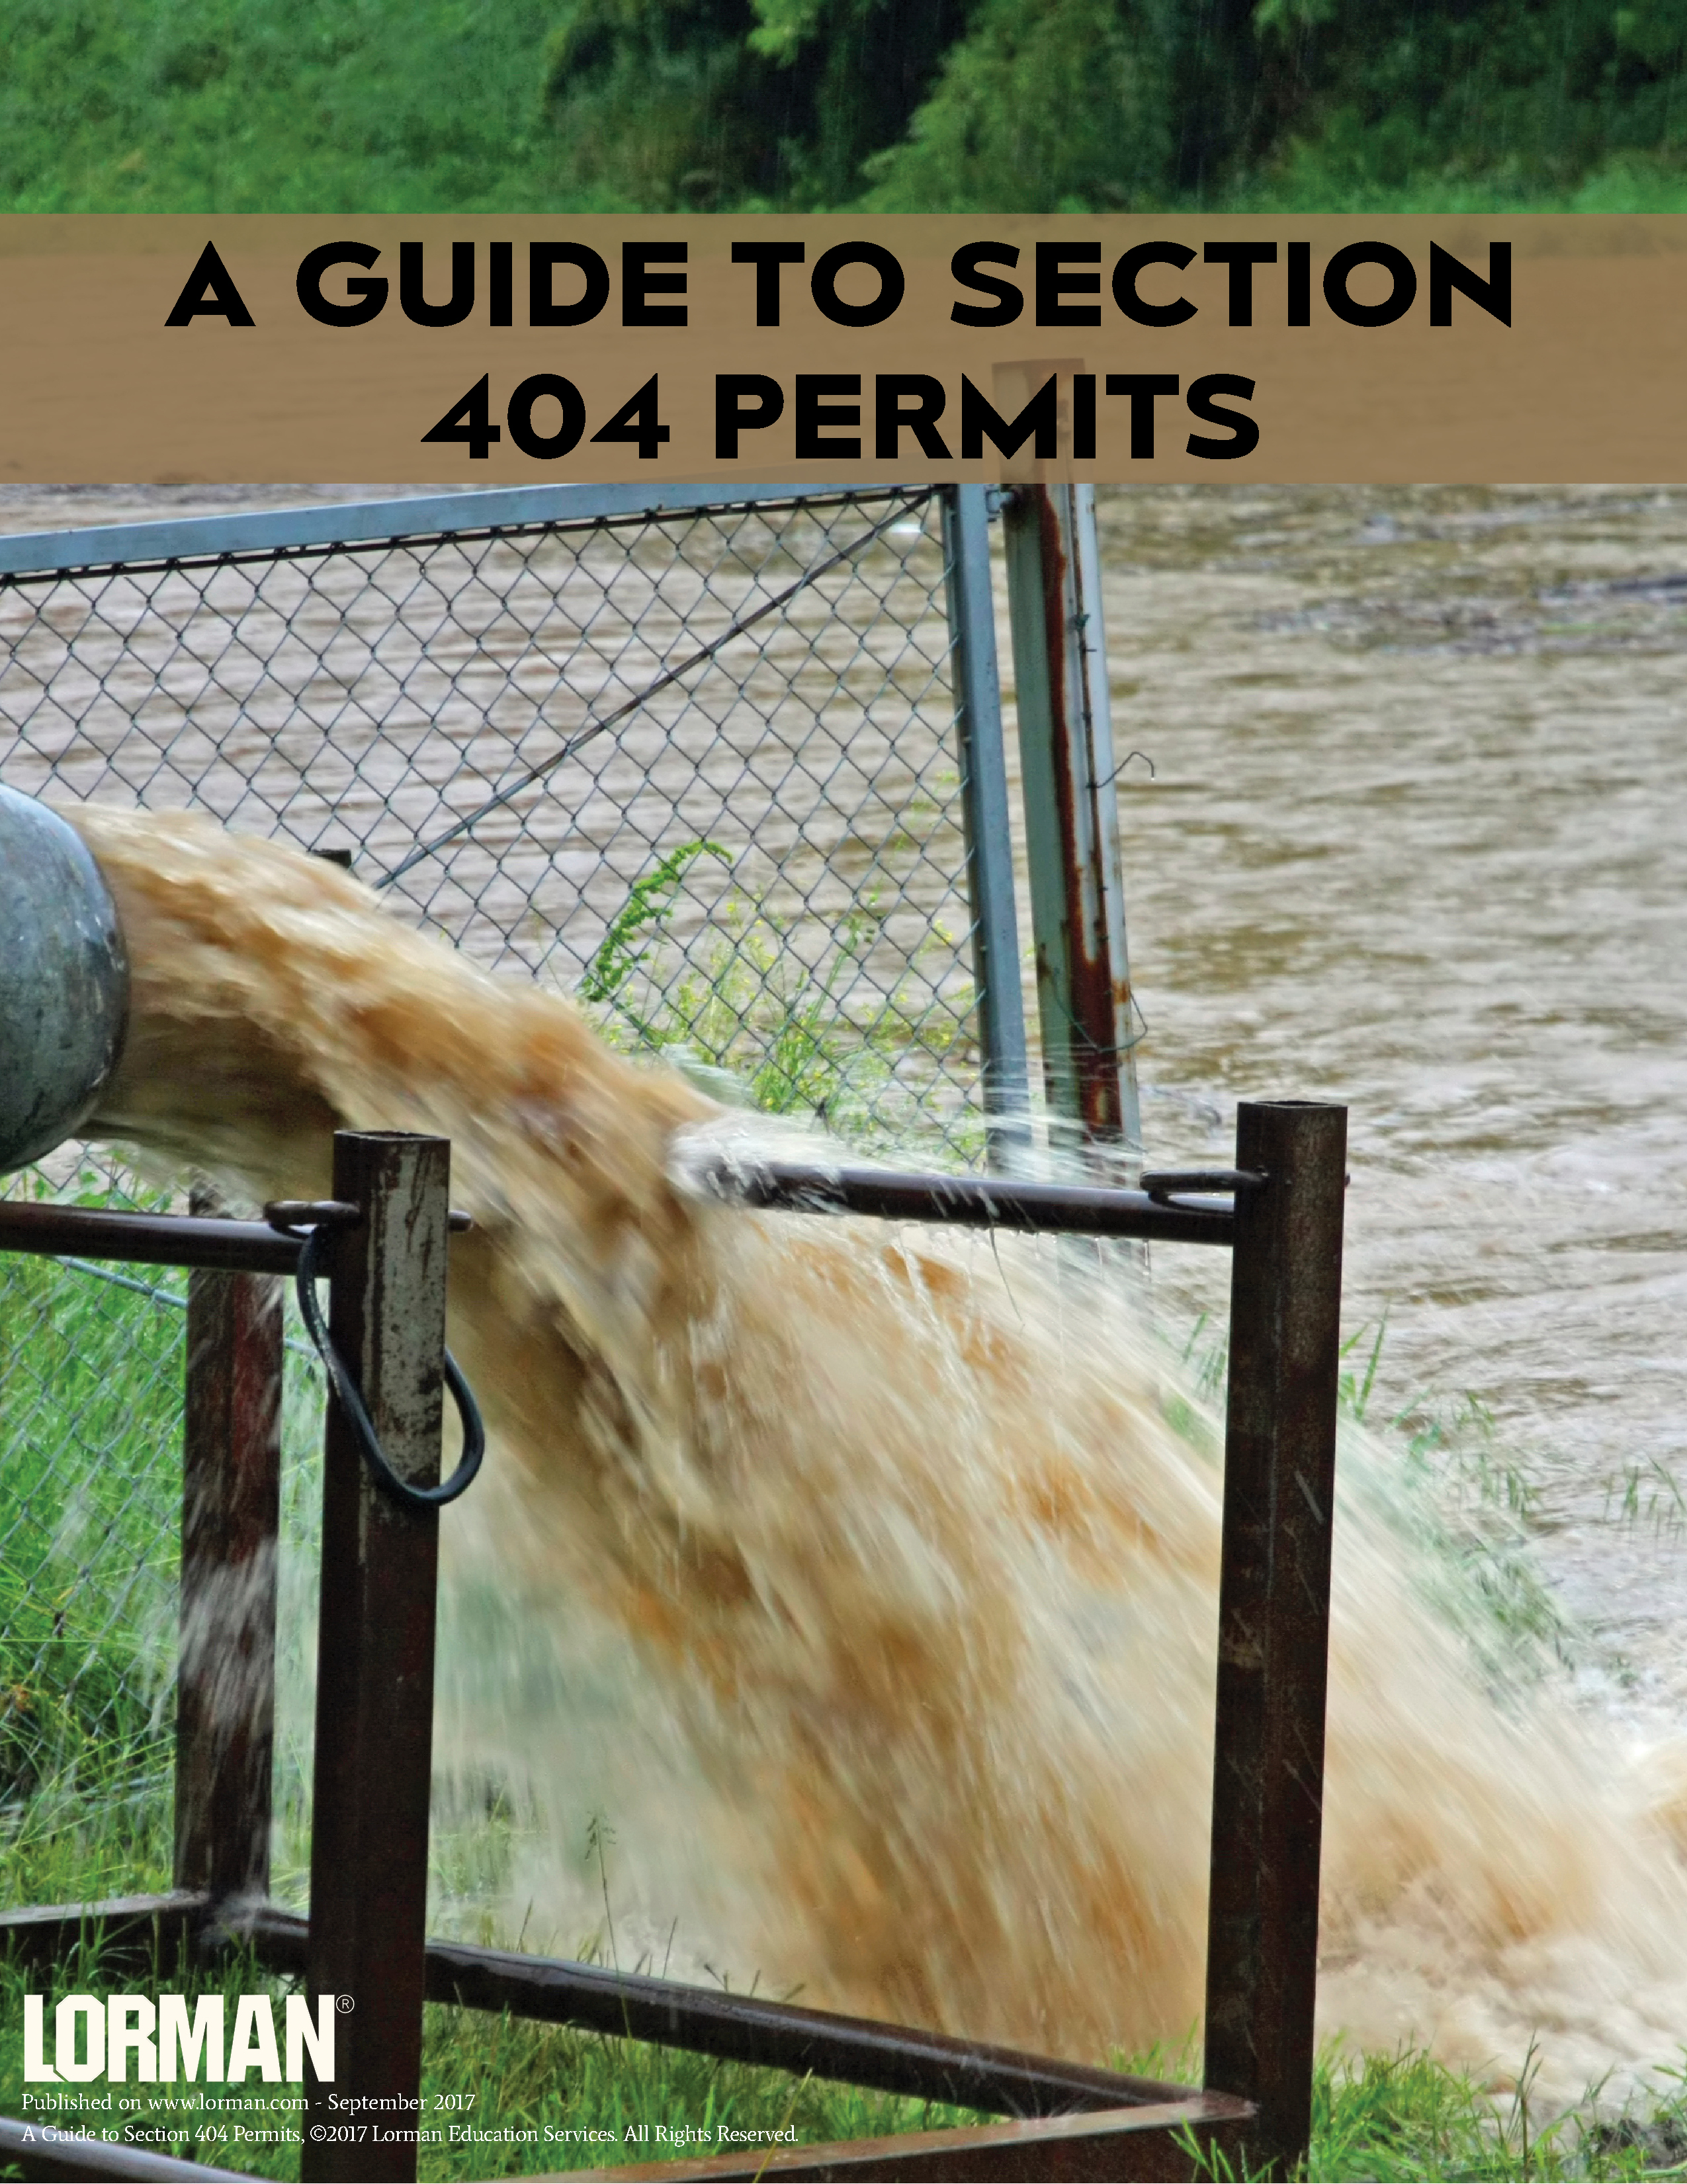 A Guide to Section 404 Permits